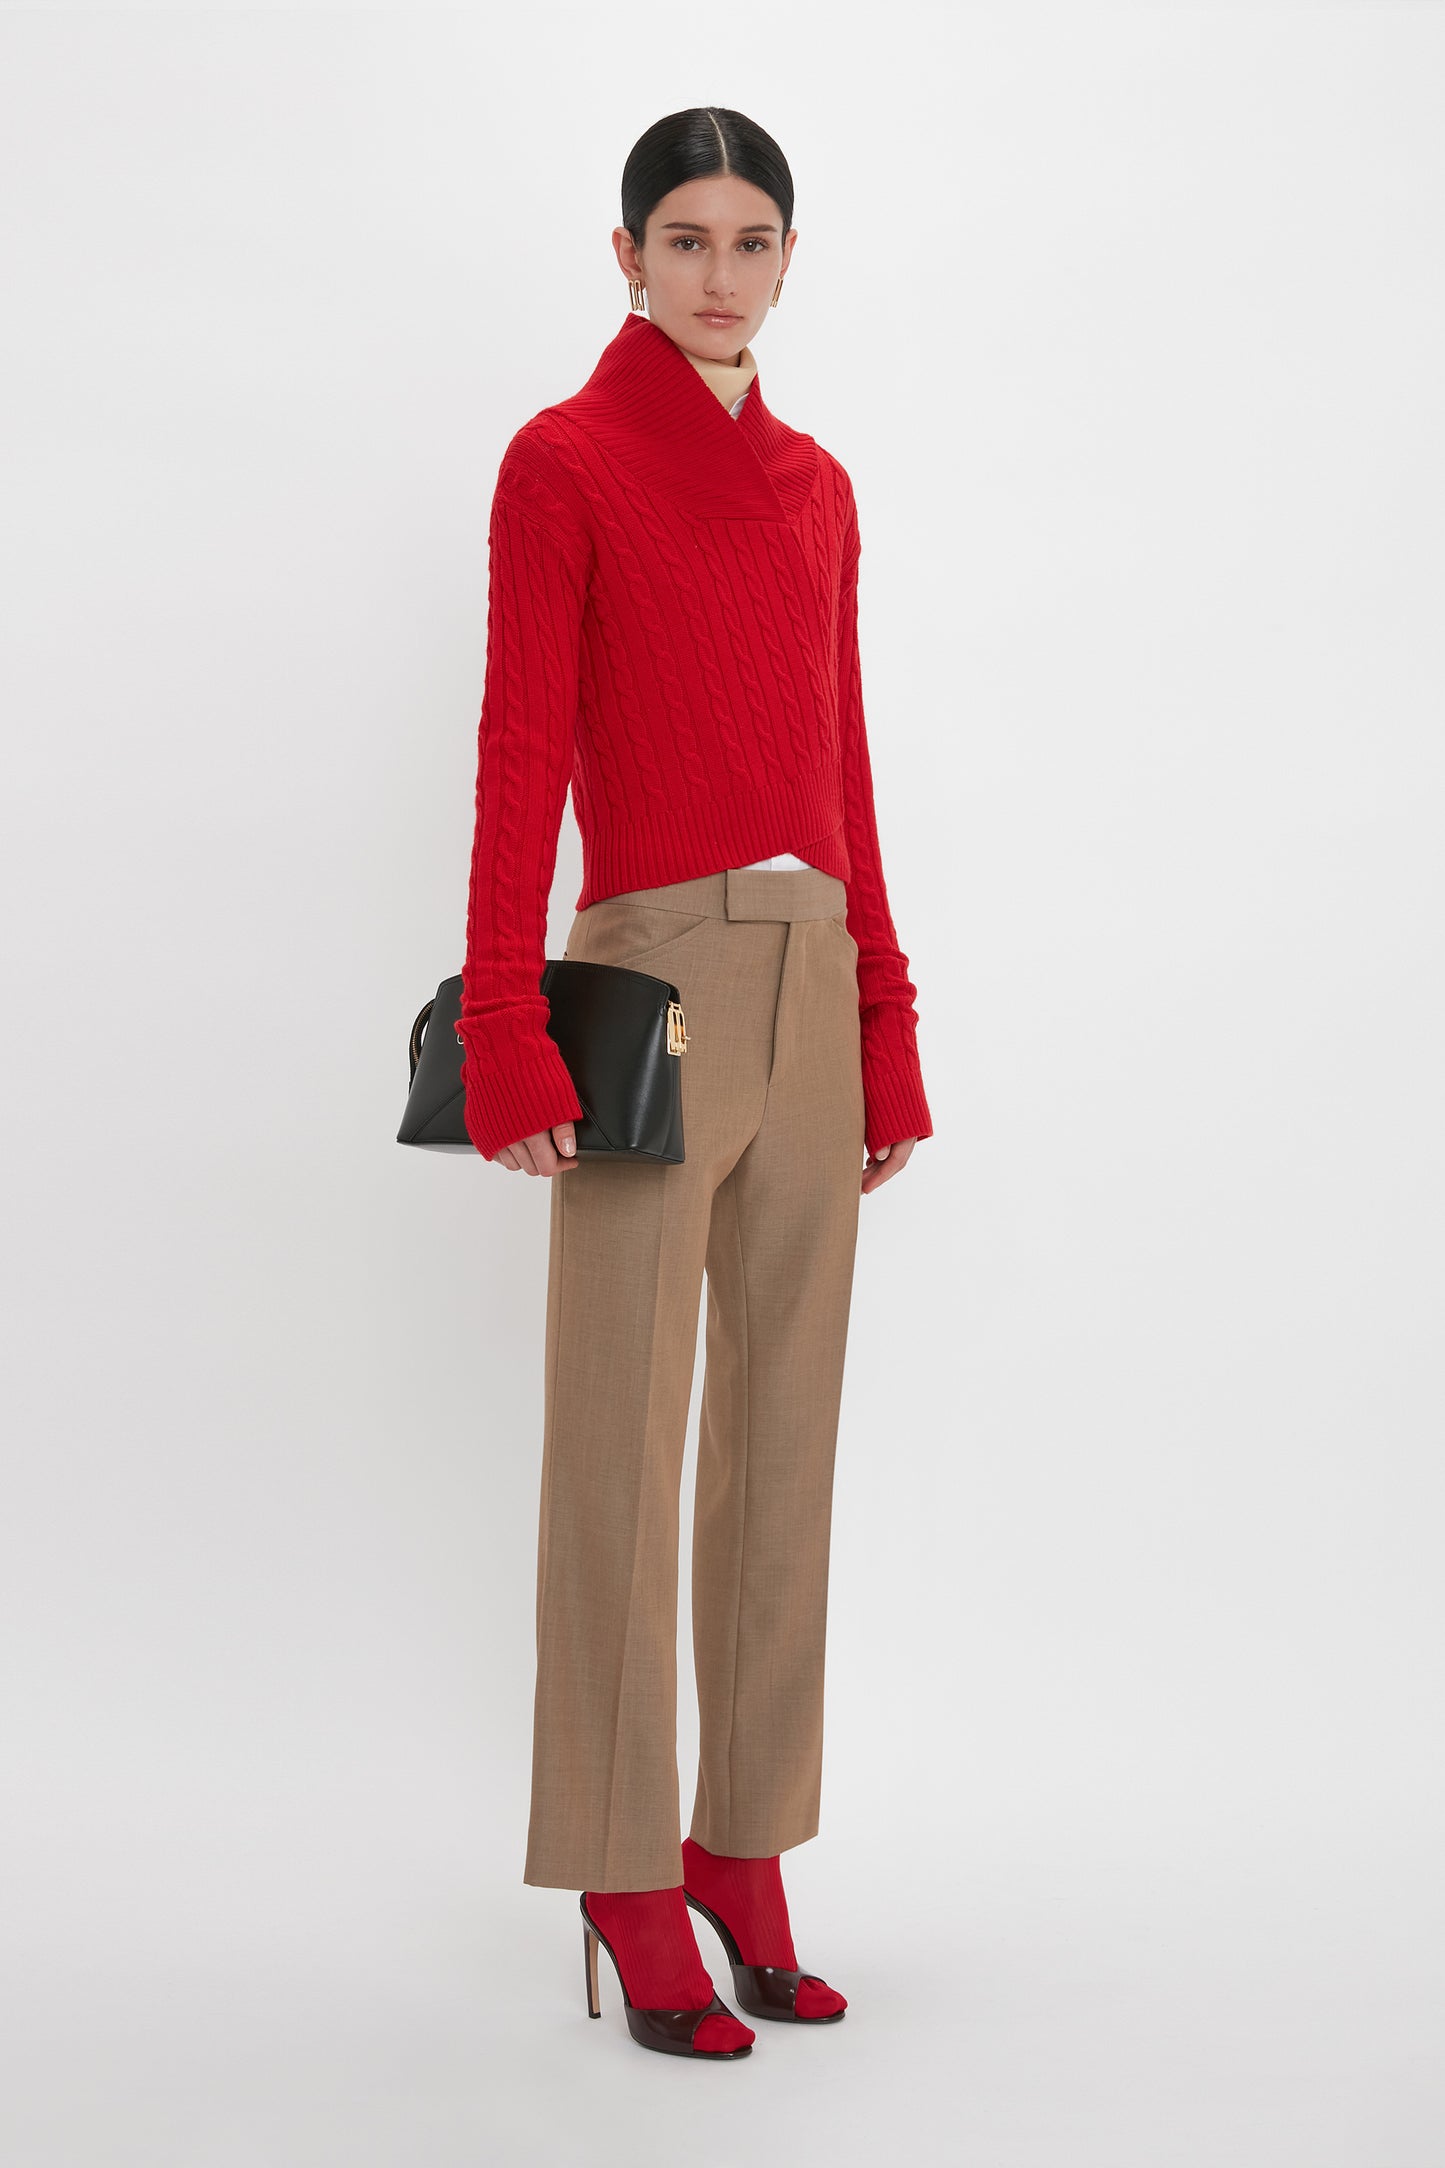 A person stands against a white background wearing a red Wrap Detail Jumper In Red from the Victoria Beckham brand, tan trousers, red shoes, and holding a black clutch.